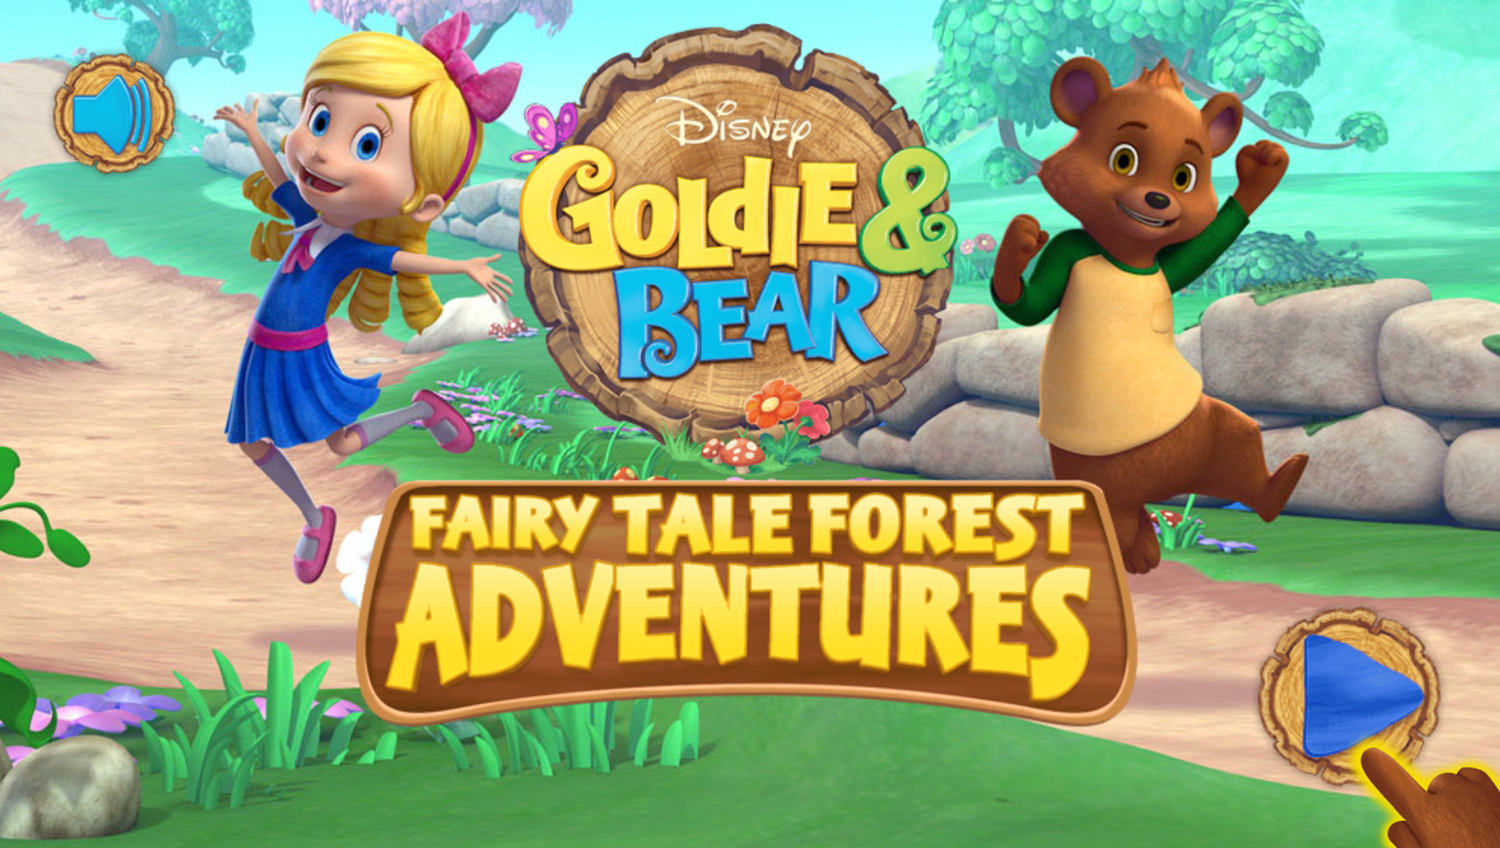 Goldie and Bear Fairy Tale Forest Adventures Game Welcome Screen Screenshot.